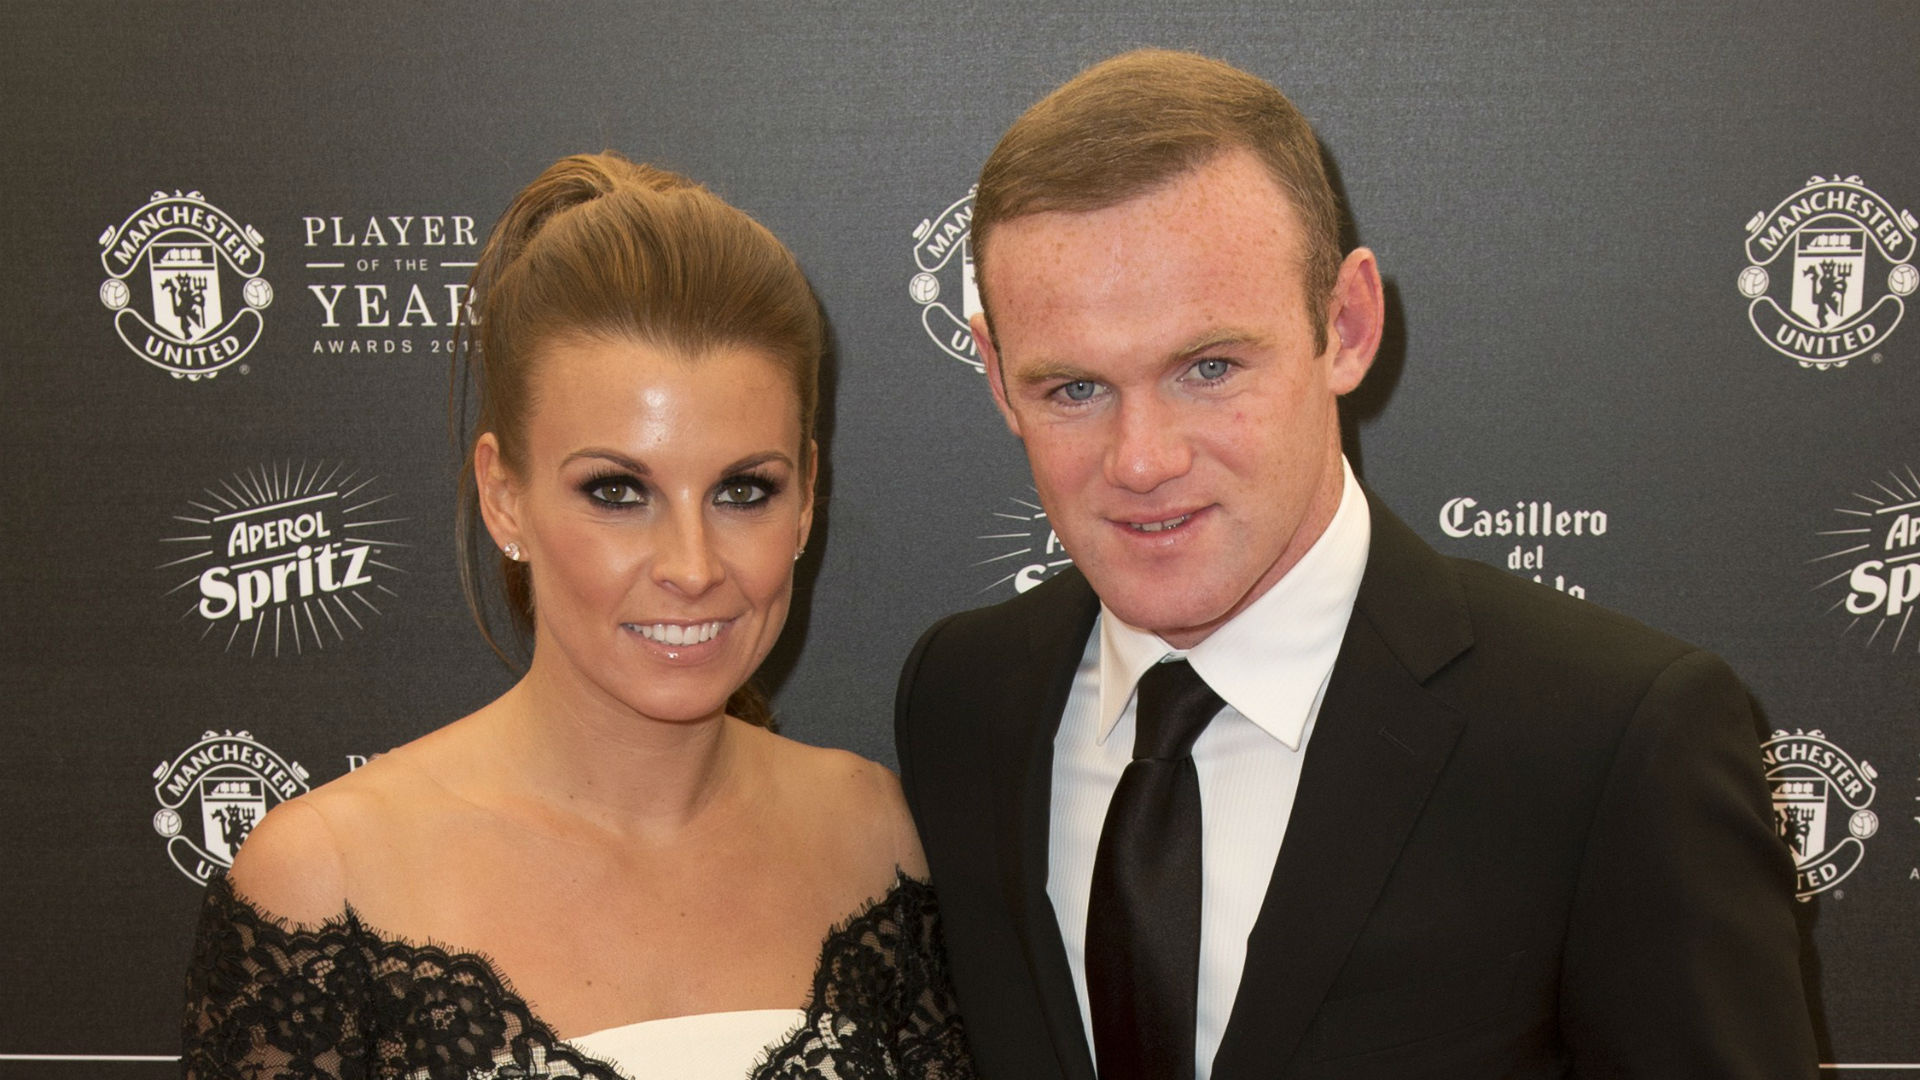 Coleen Rooney, Wayne Rooney's wife, Everything you need, Know, 1920x1080 Full HD Desktop